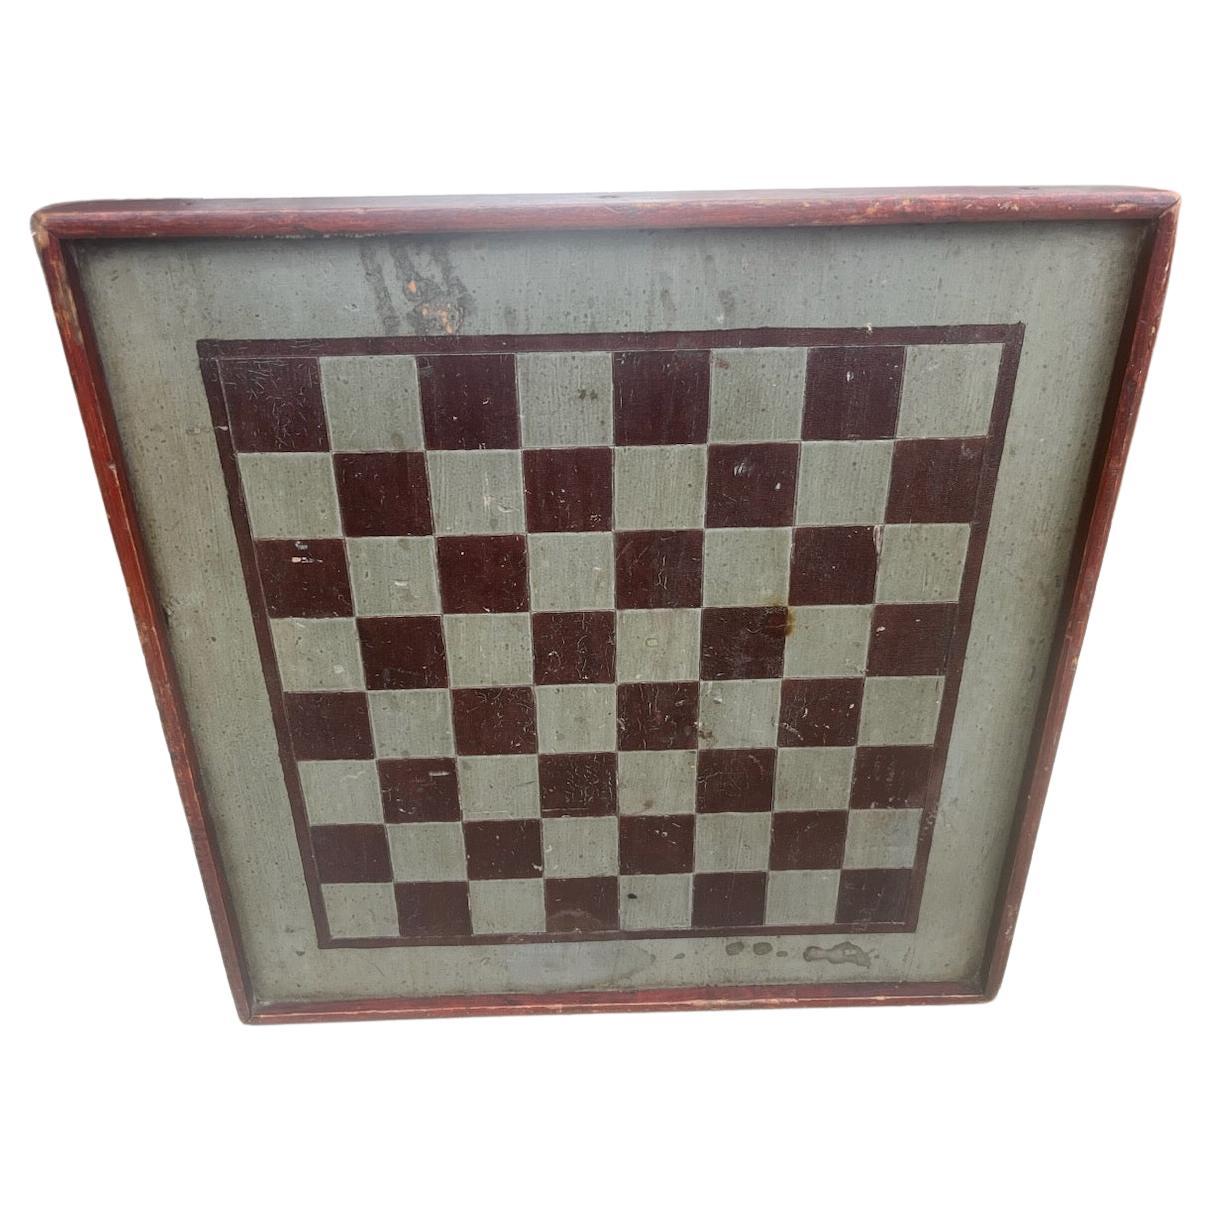 19Thc Original painted game board in sage green & brown painted surface.The construction is cut nails and fine patina.